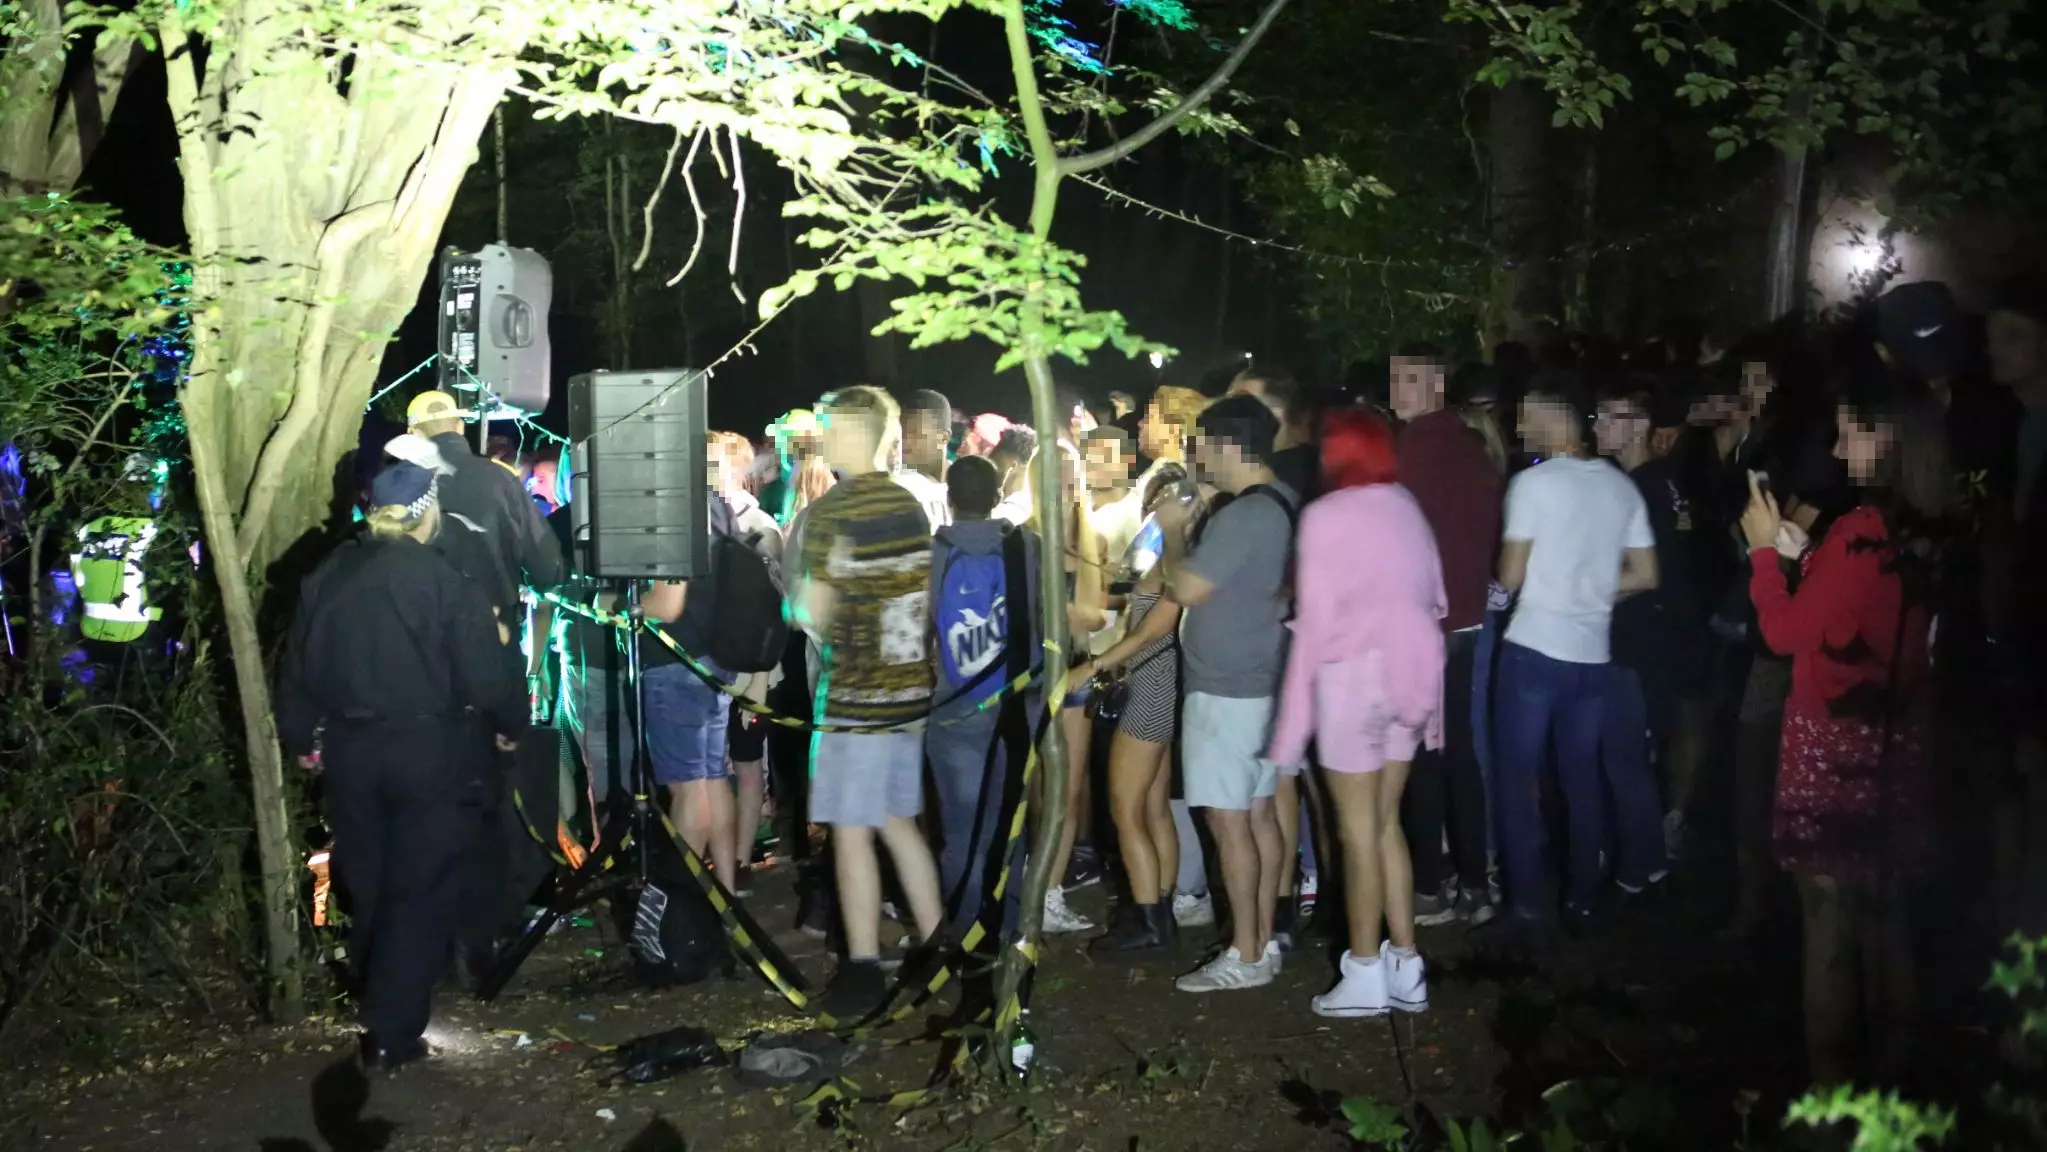 Police Shut Down Illegal Rave After 500 People Pile Into Forest